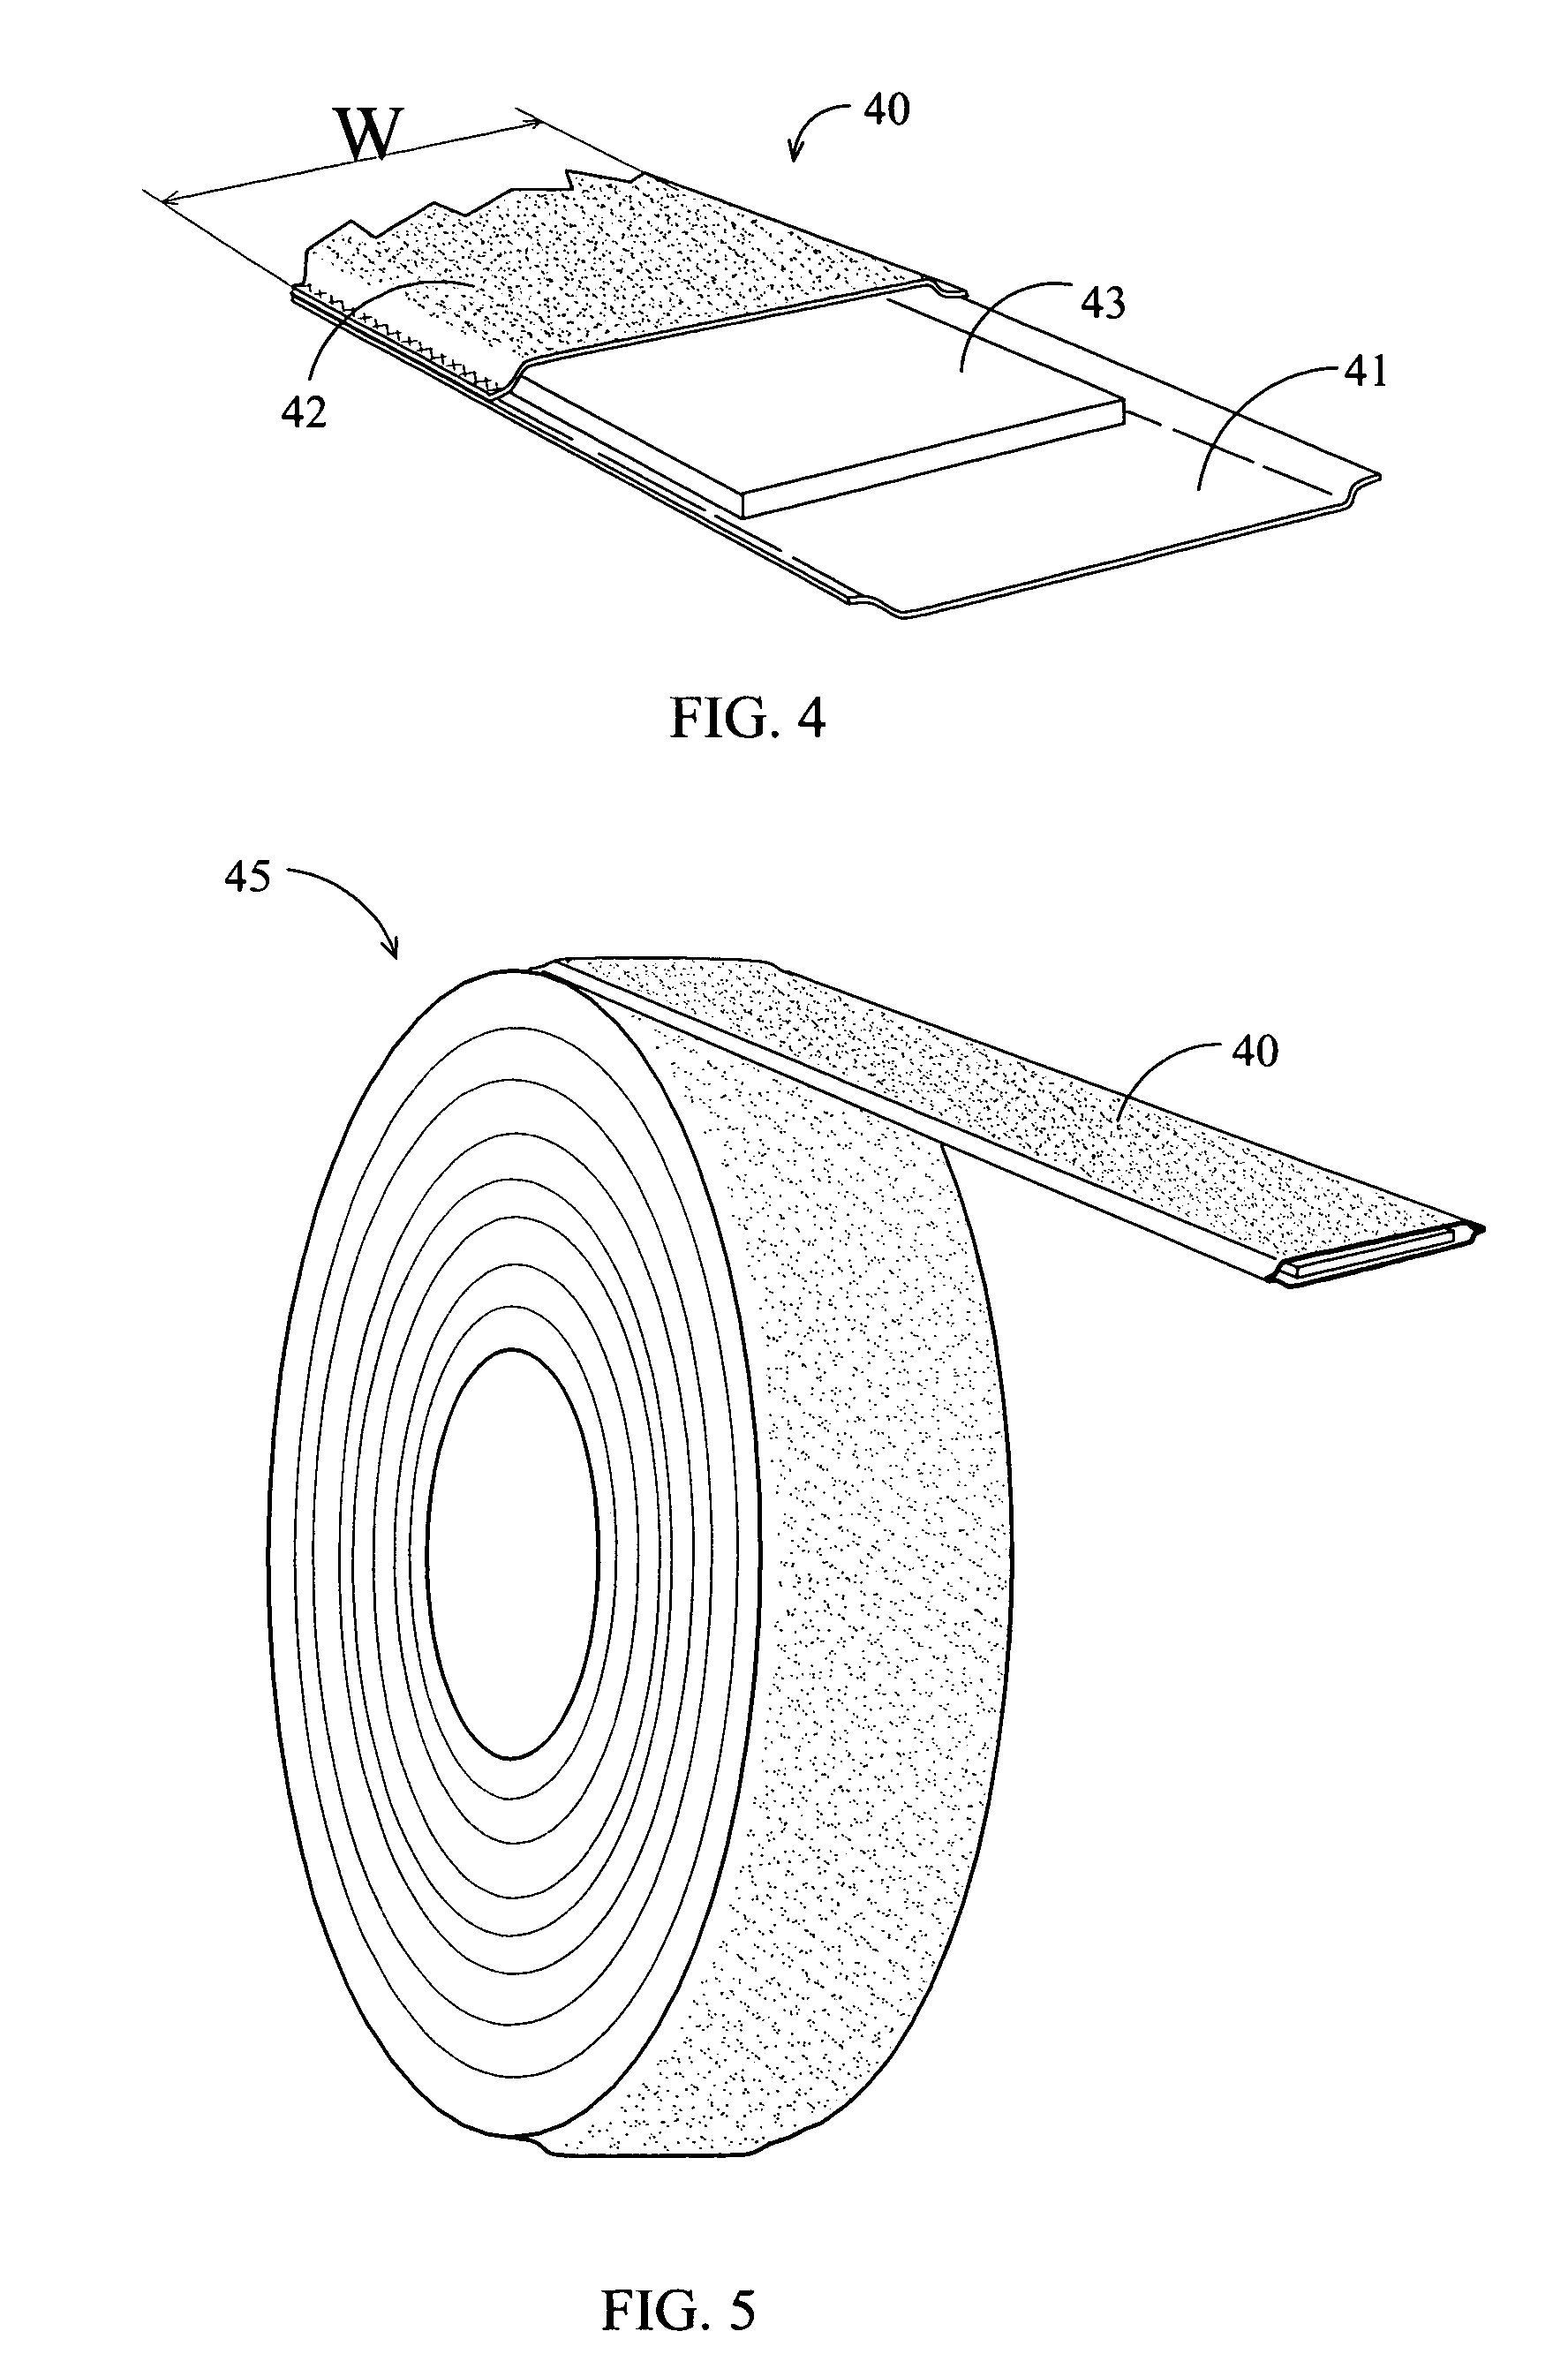 Modular filtering and reflective system for photographic use